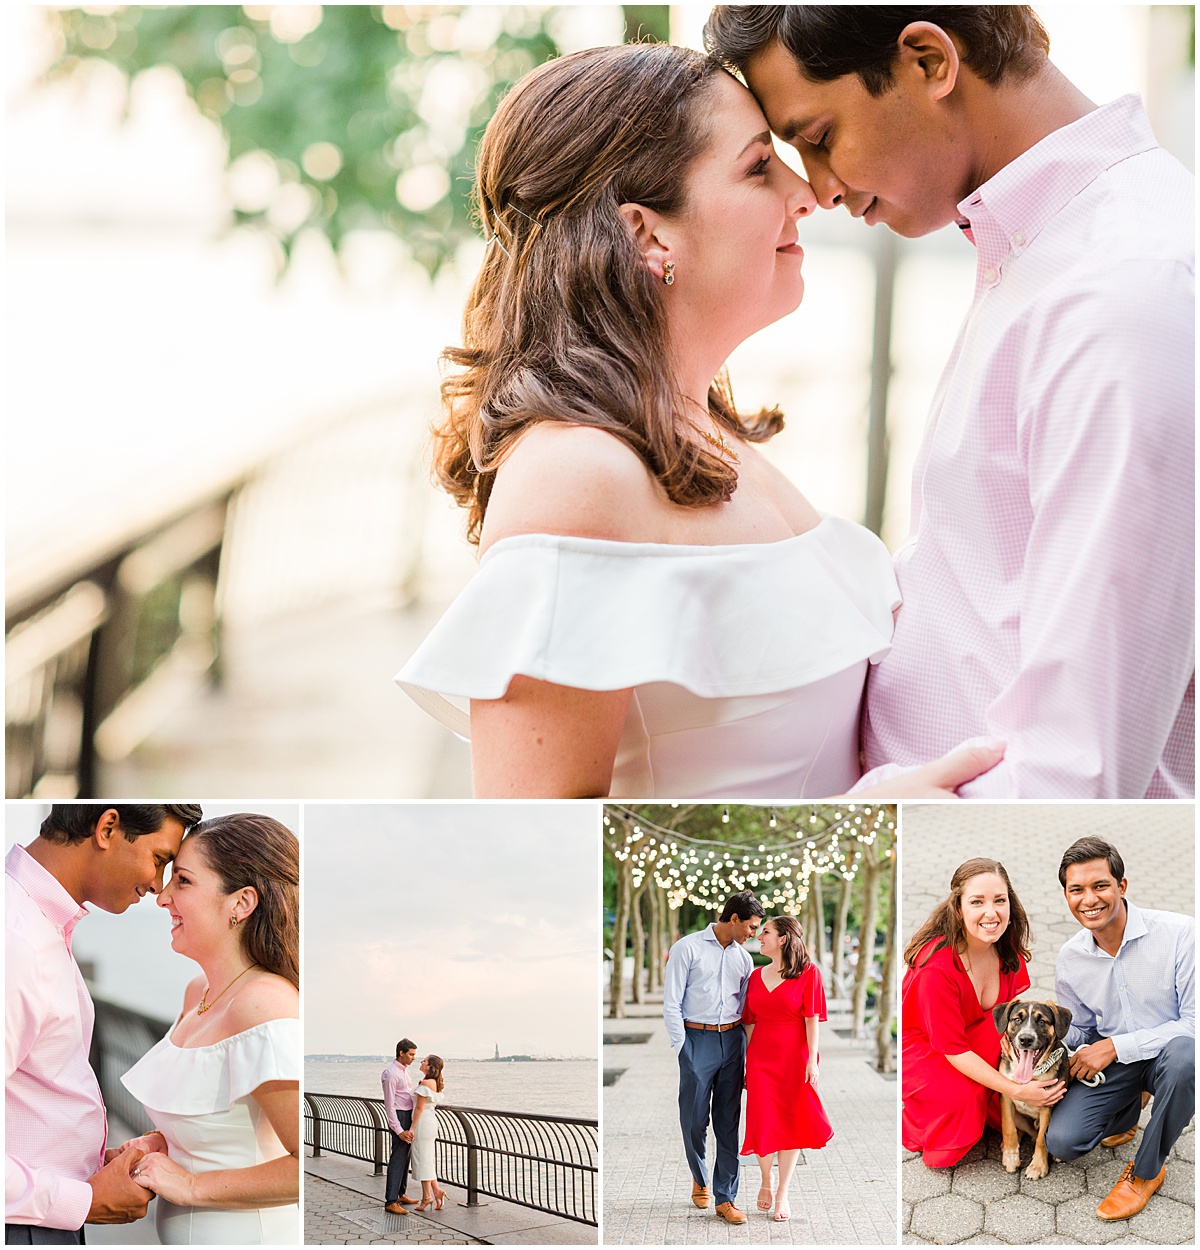 Battery Park City Engagement Session with Lauren Kearns Photography